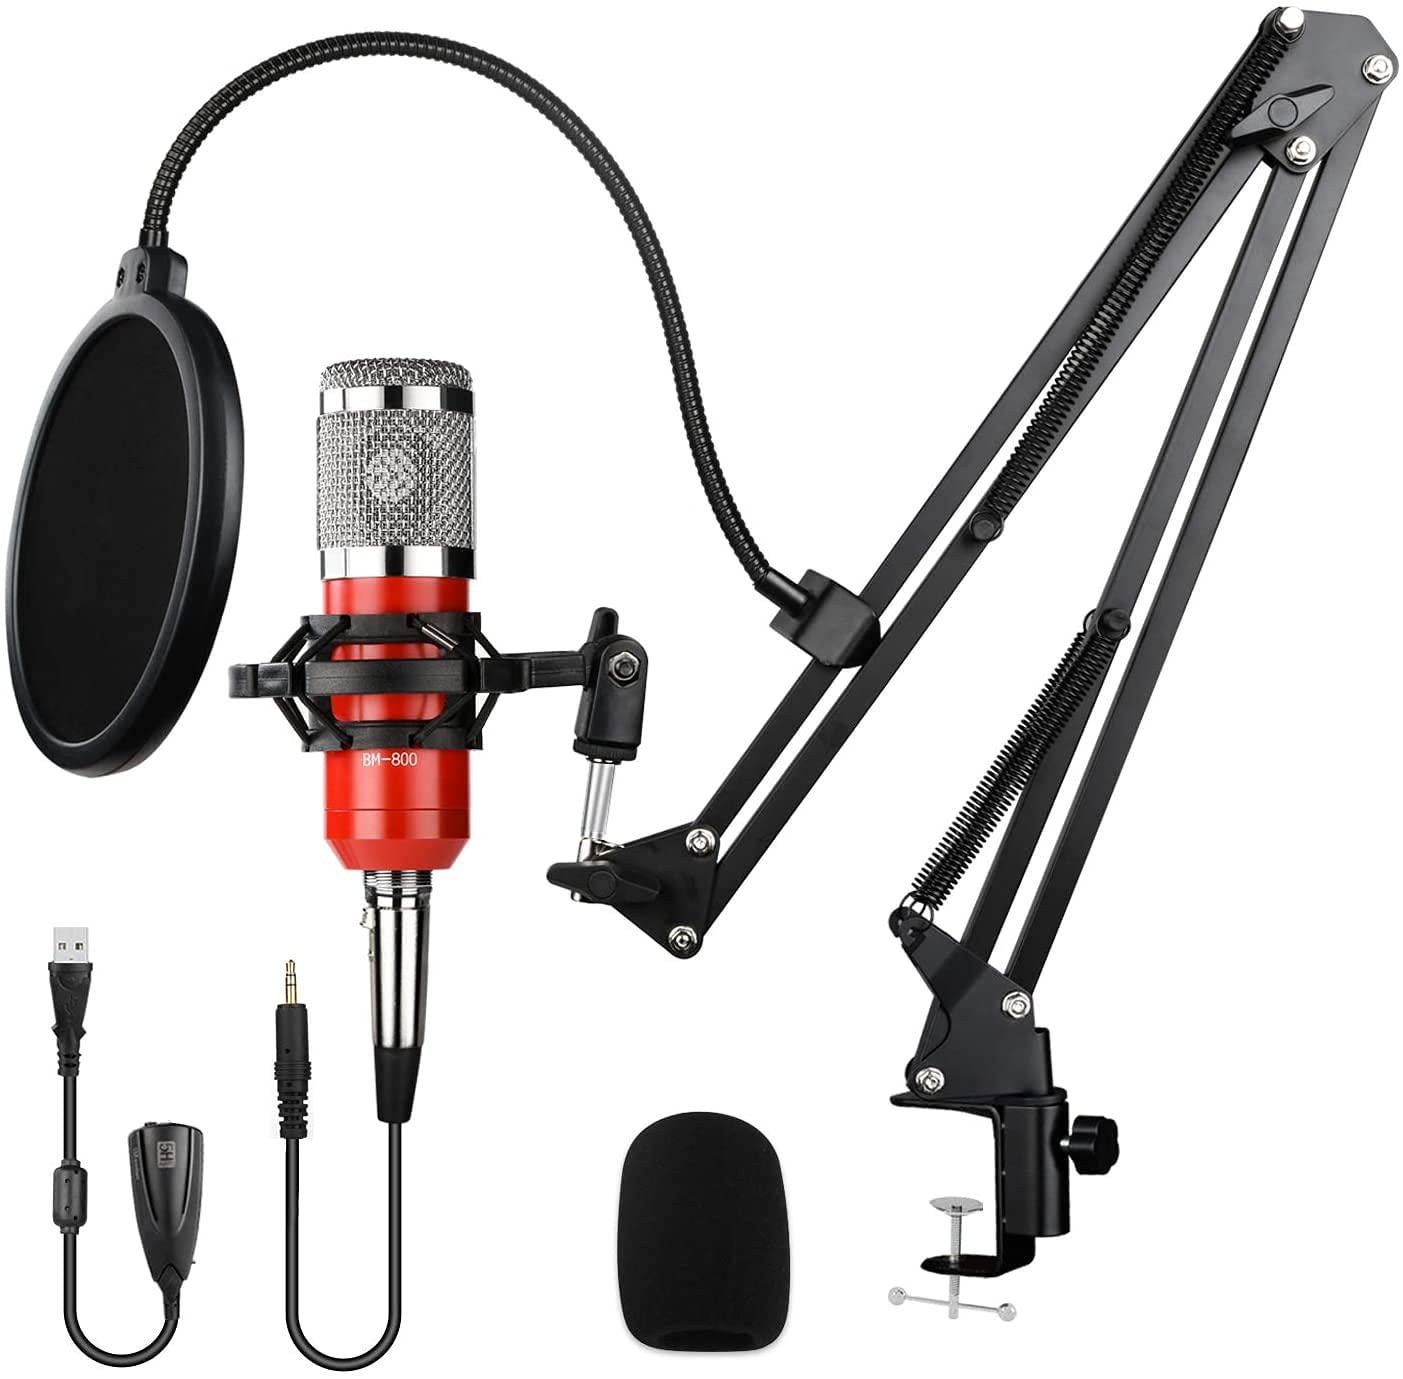 DIGITNOW Condenser Microphone Bundle Kit,Computer PC Cardioid Studio Mic Set with Mic Suspension Scissor Arm, Stand Shock Mount & Pop Filter for Instruments Voice Overs Recording & Broadcasting